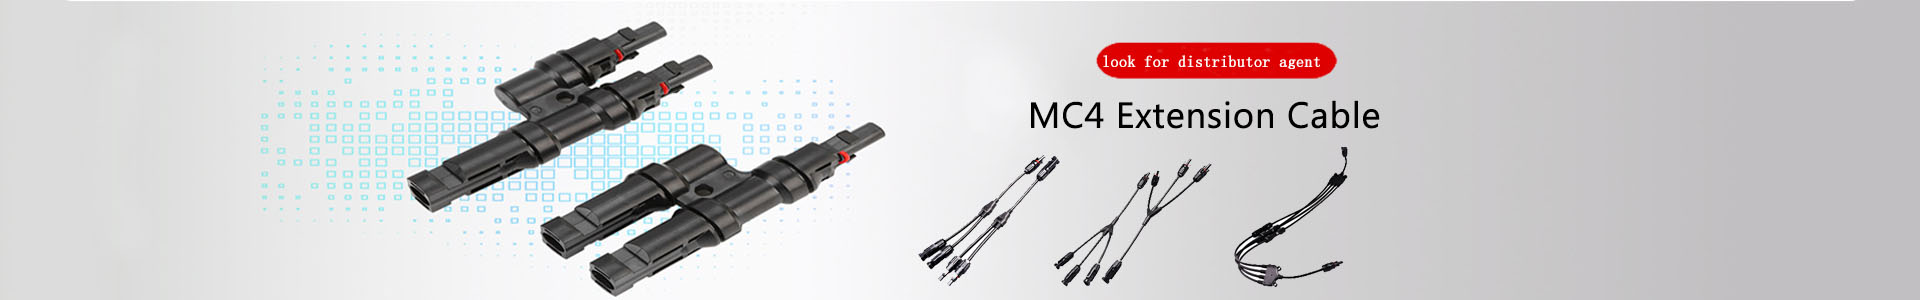 German solar power plant project-Solar power plant project-Solar | solar connector,solar branch connector,diode fuse connector,MC4 extnsion cable,H1Z2Z2 solar cable, UL4703 solar cable | Leading manufacturer and supplier of solar pv cables and connectors